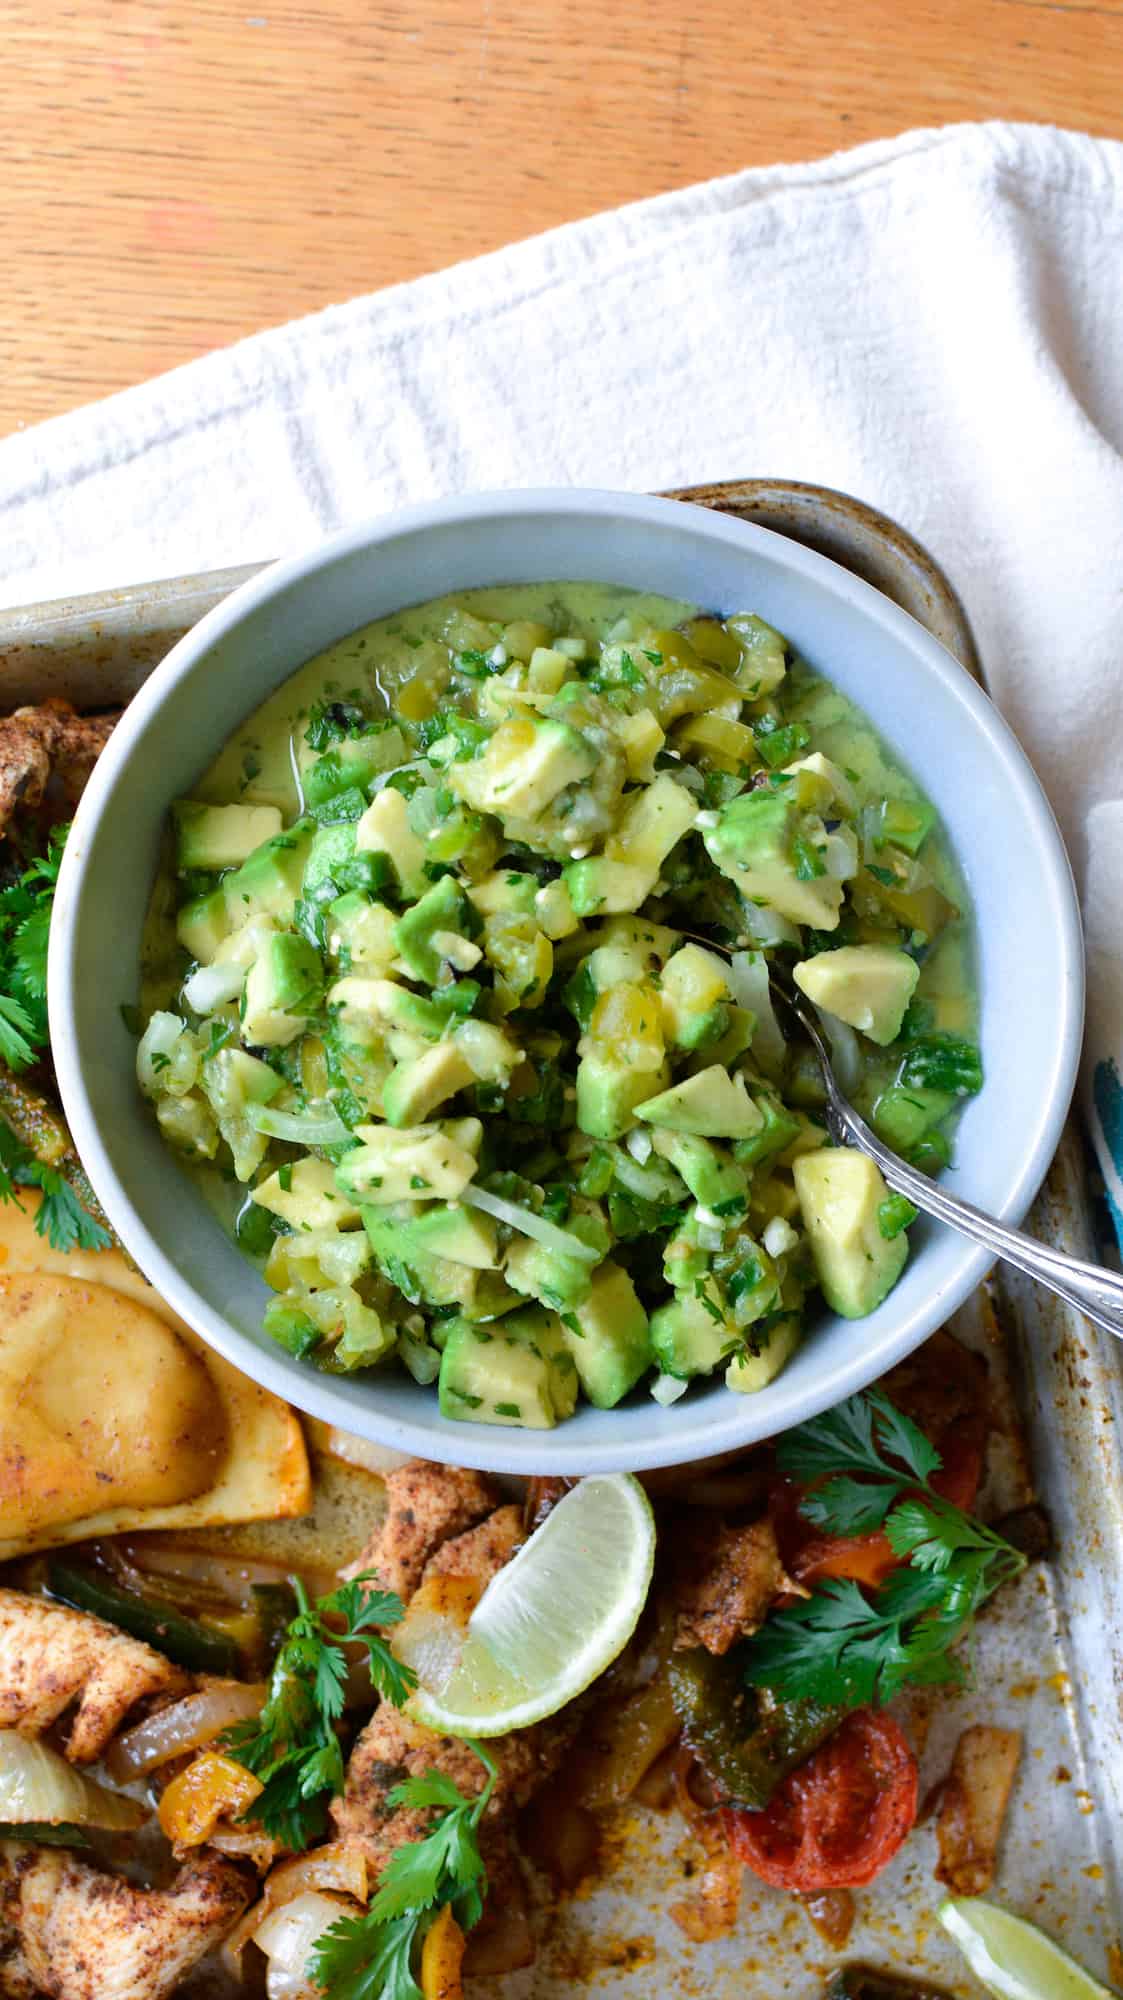 If you’ve been hunting for an easy Avocado Salsa recipe, look no further! Ripe avocado, fresh cilantro, and lots of spicy jalapeños make this completely irresistible. This avocado salsa is as perfect on a tortilla chip as it is over a piece of grilled salmon. #avocadosalsa #avocados #avocadosalsarecipe #avocadorecipe